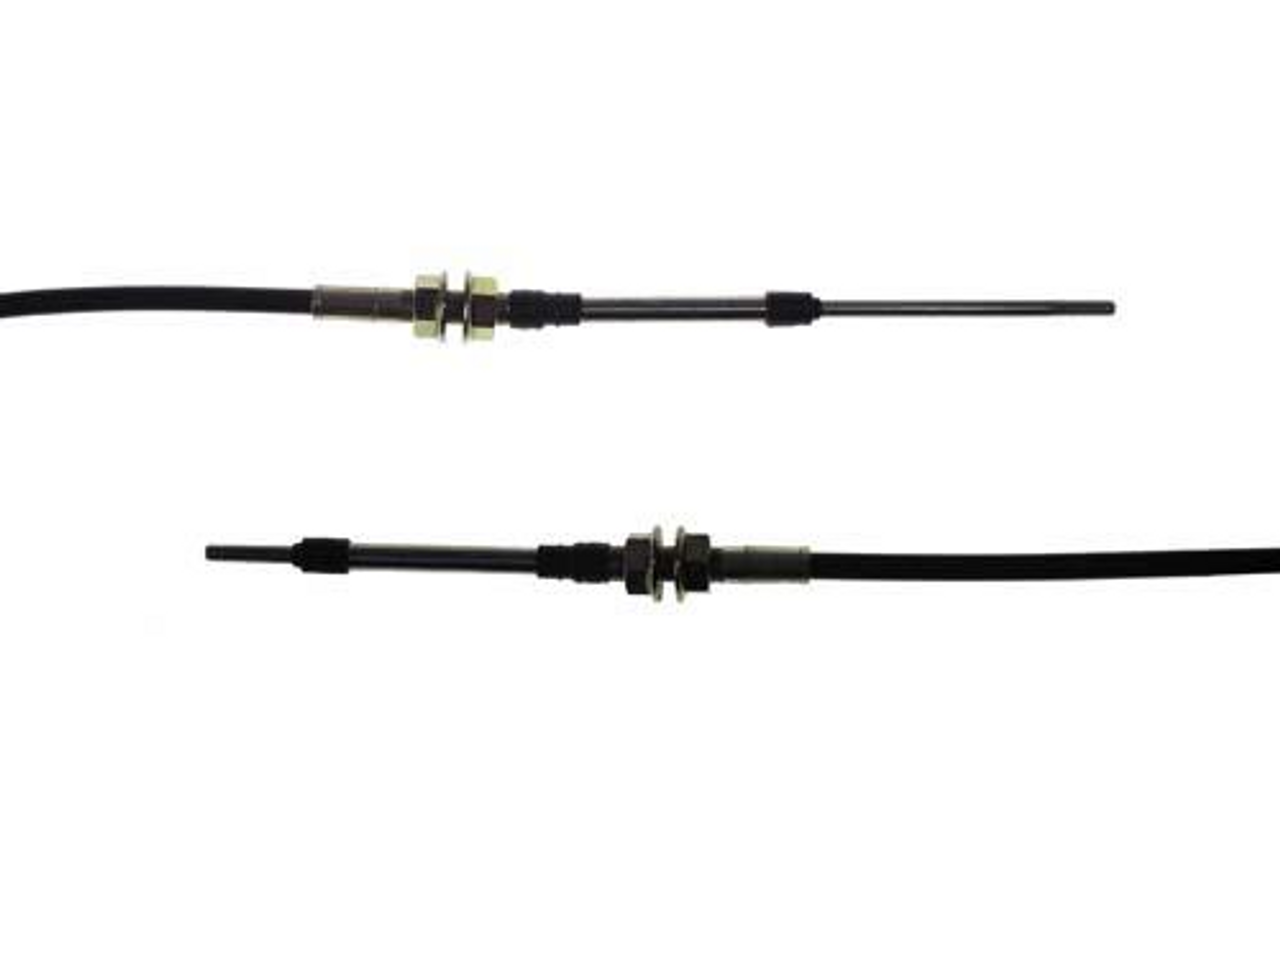 Transmission Shift Cable-294/ Xrt 1500, 6527, 1024958-01